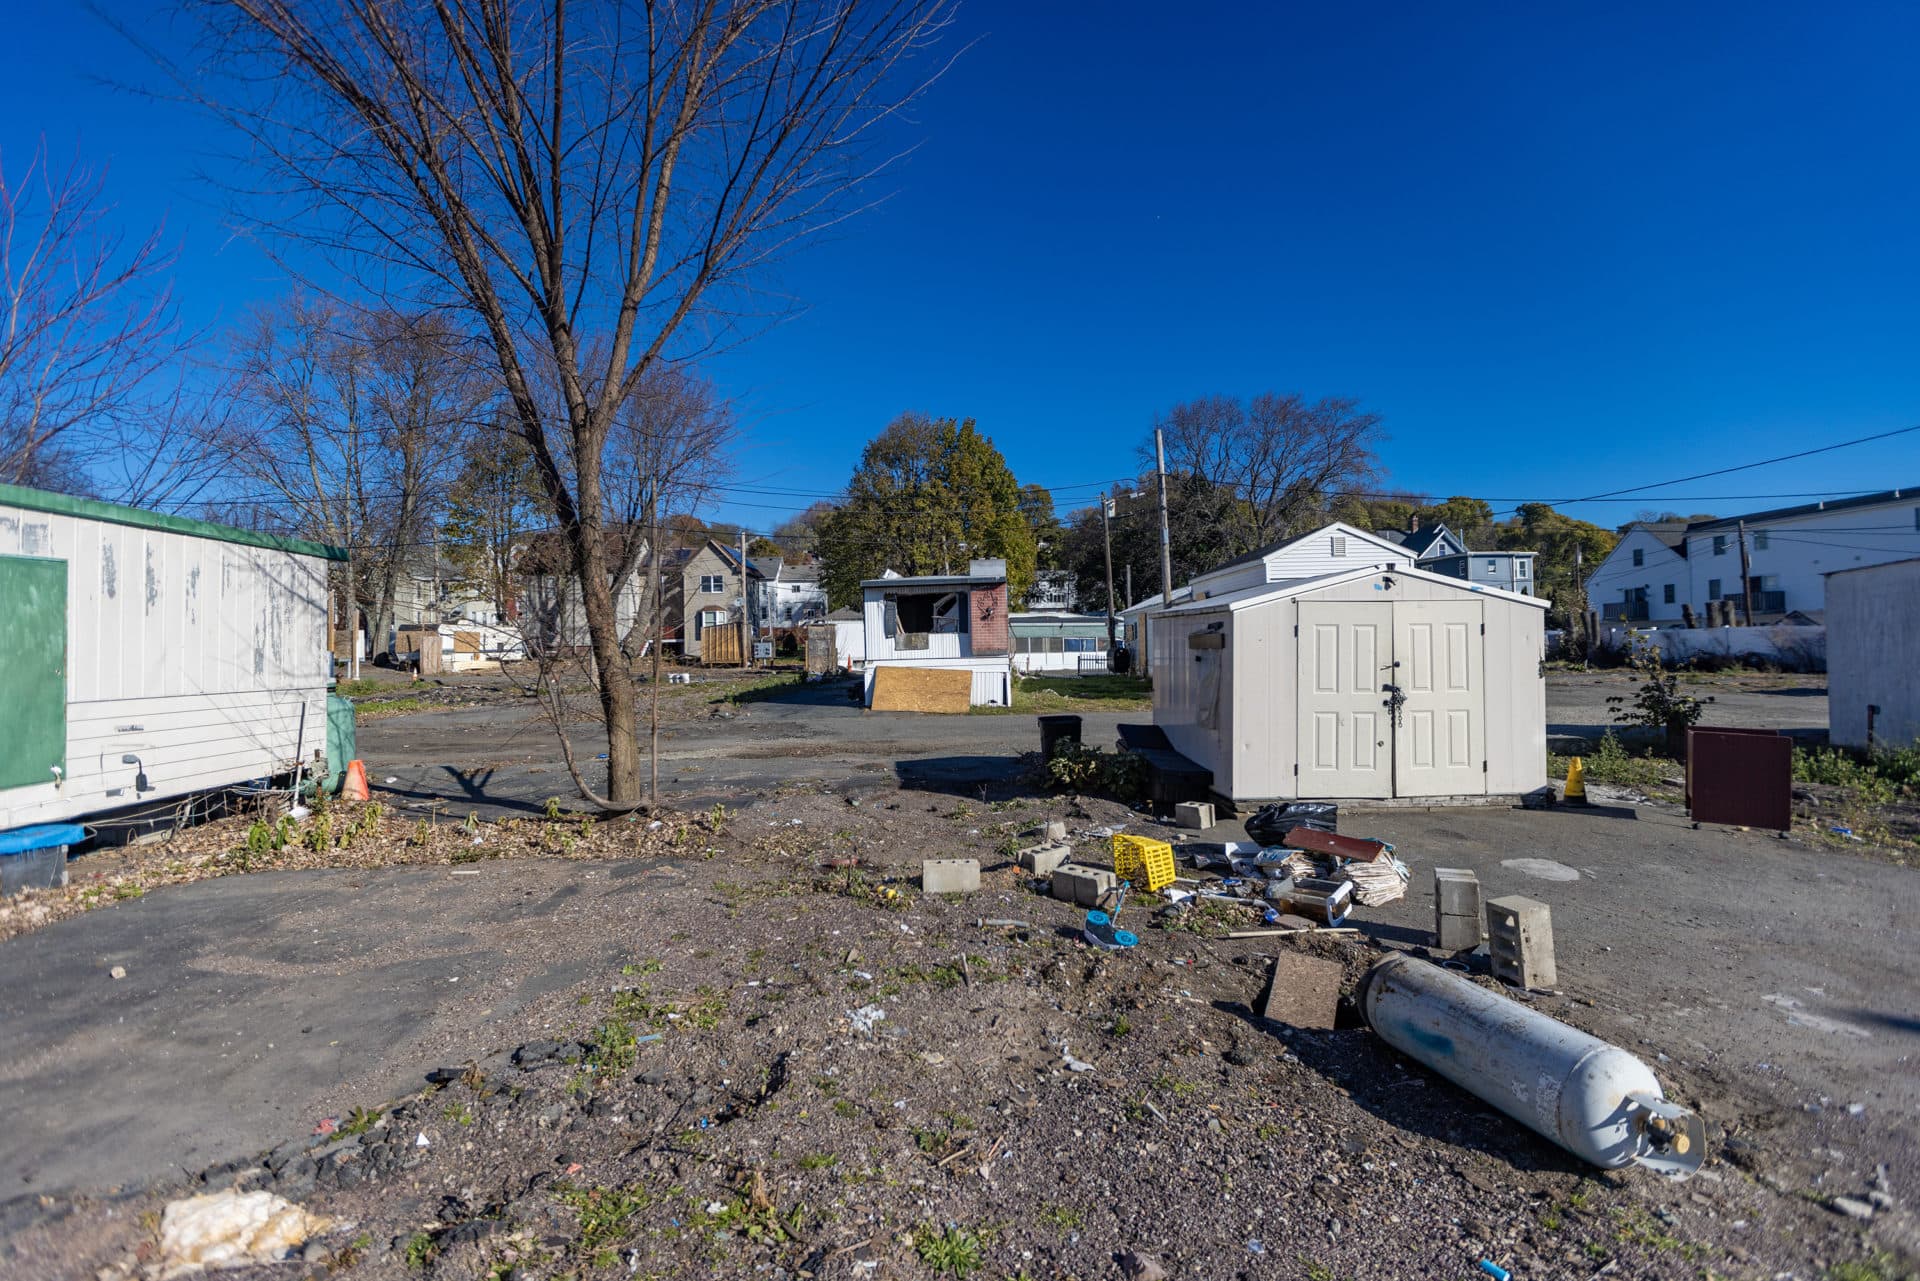 Boarded up and abandoned trailers at Lee's Trailer Park in Revere. (Jesse Costa/WBUR)